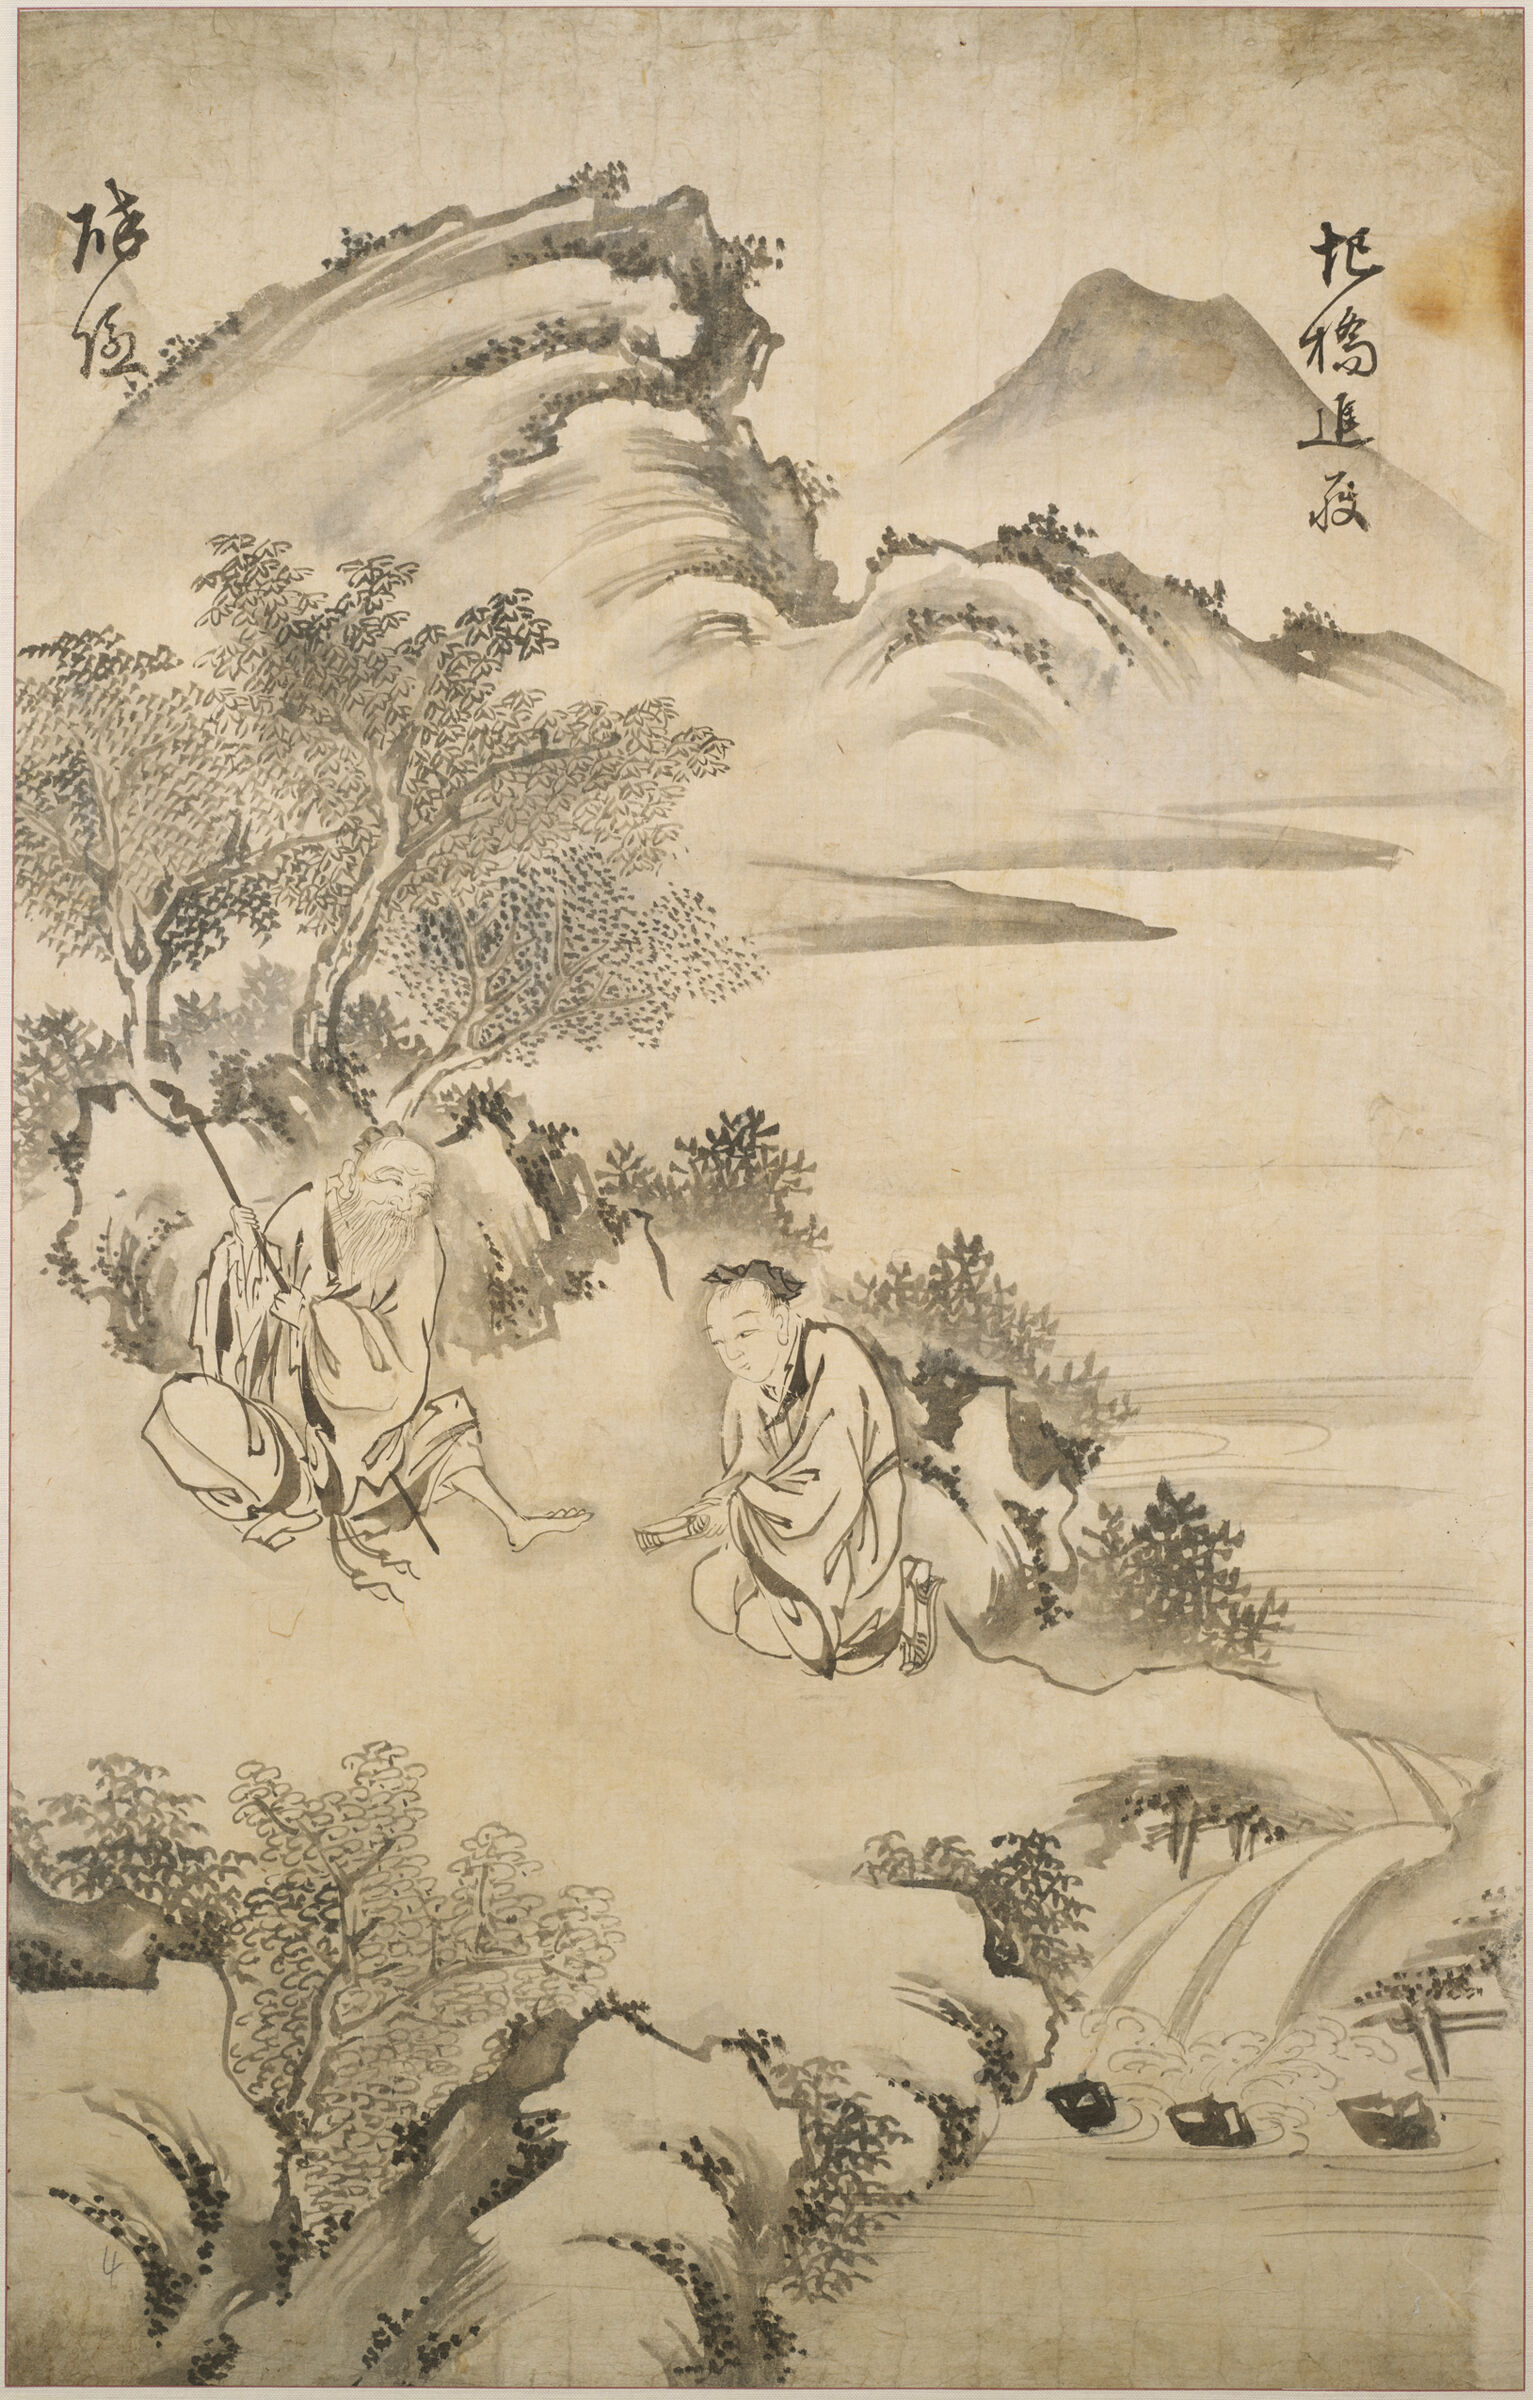 Former Prime Minister Zhang Liang (D. 189 Bc) Presenting The Straw Sandal To The Sage At Yi Bridge